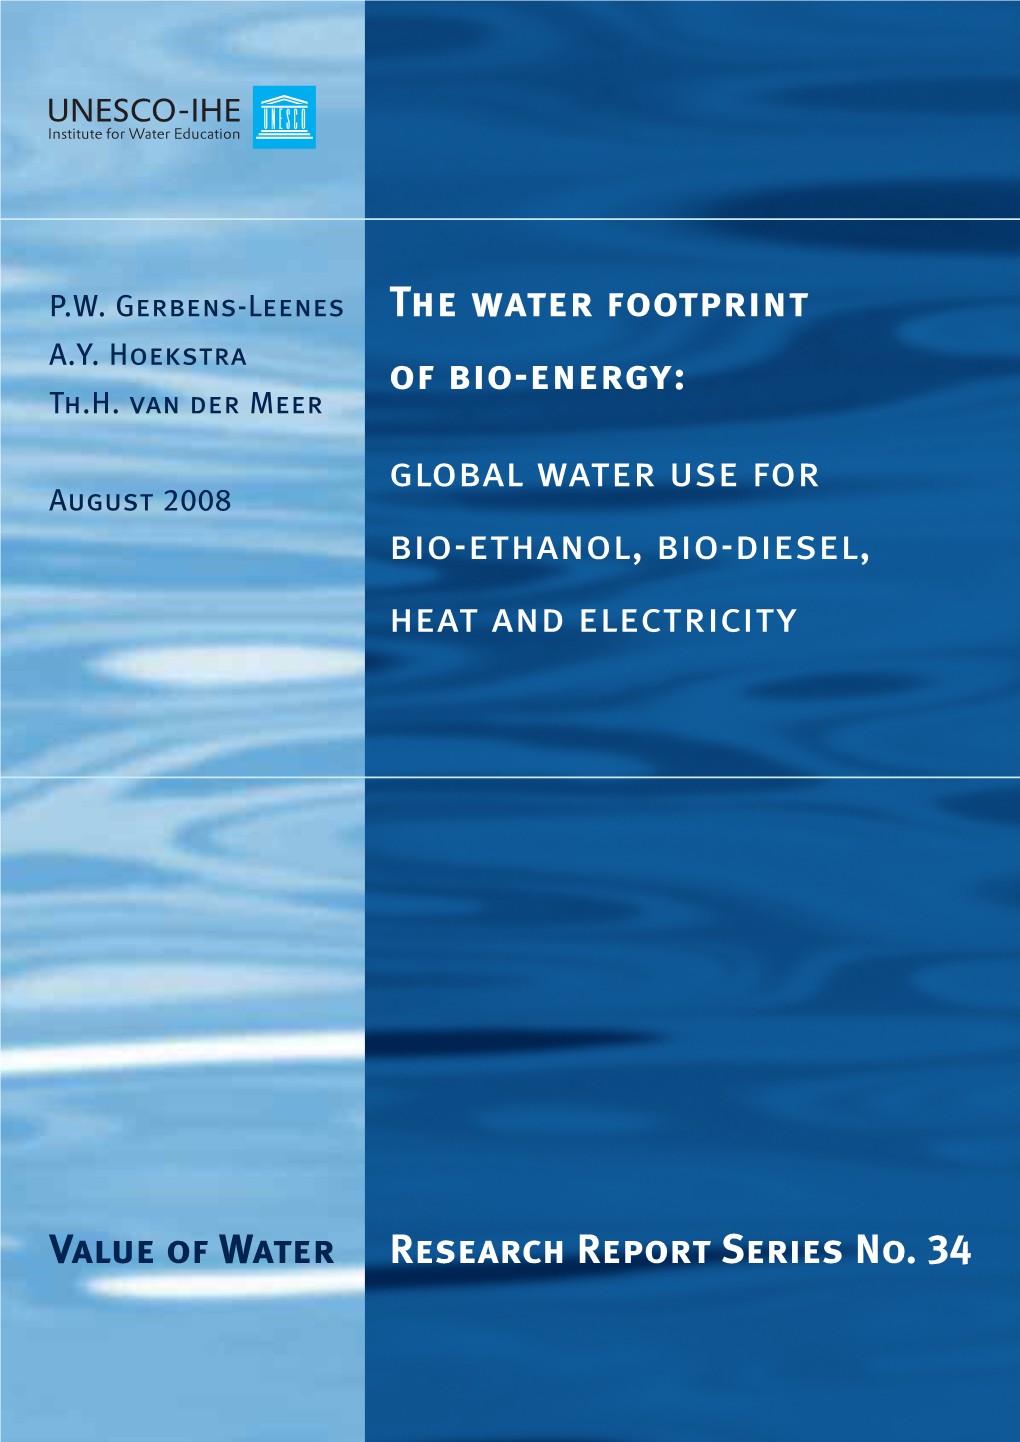 Global Water Use for Bio-Ethanol, Bio-Diesel, Heat and Electricity P.W